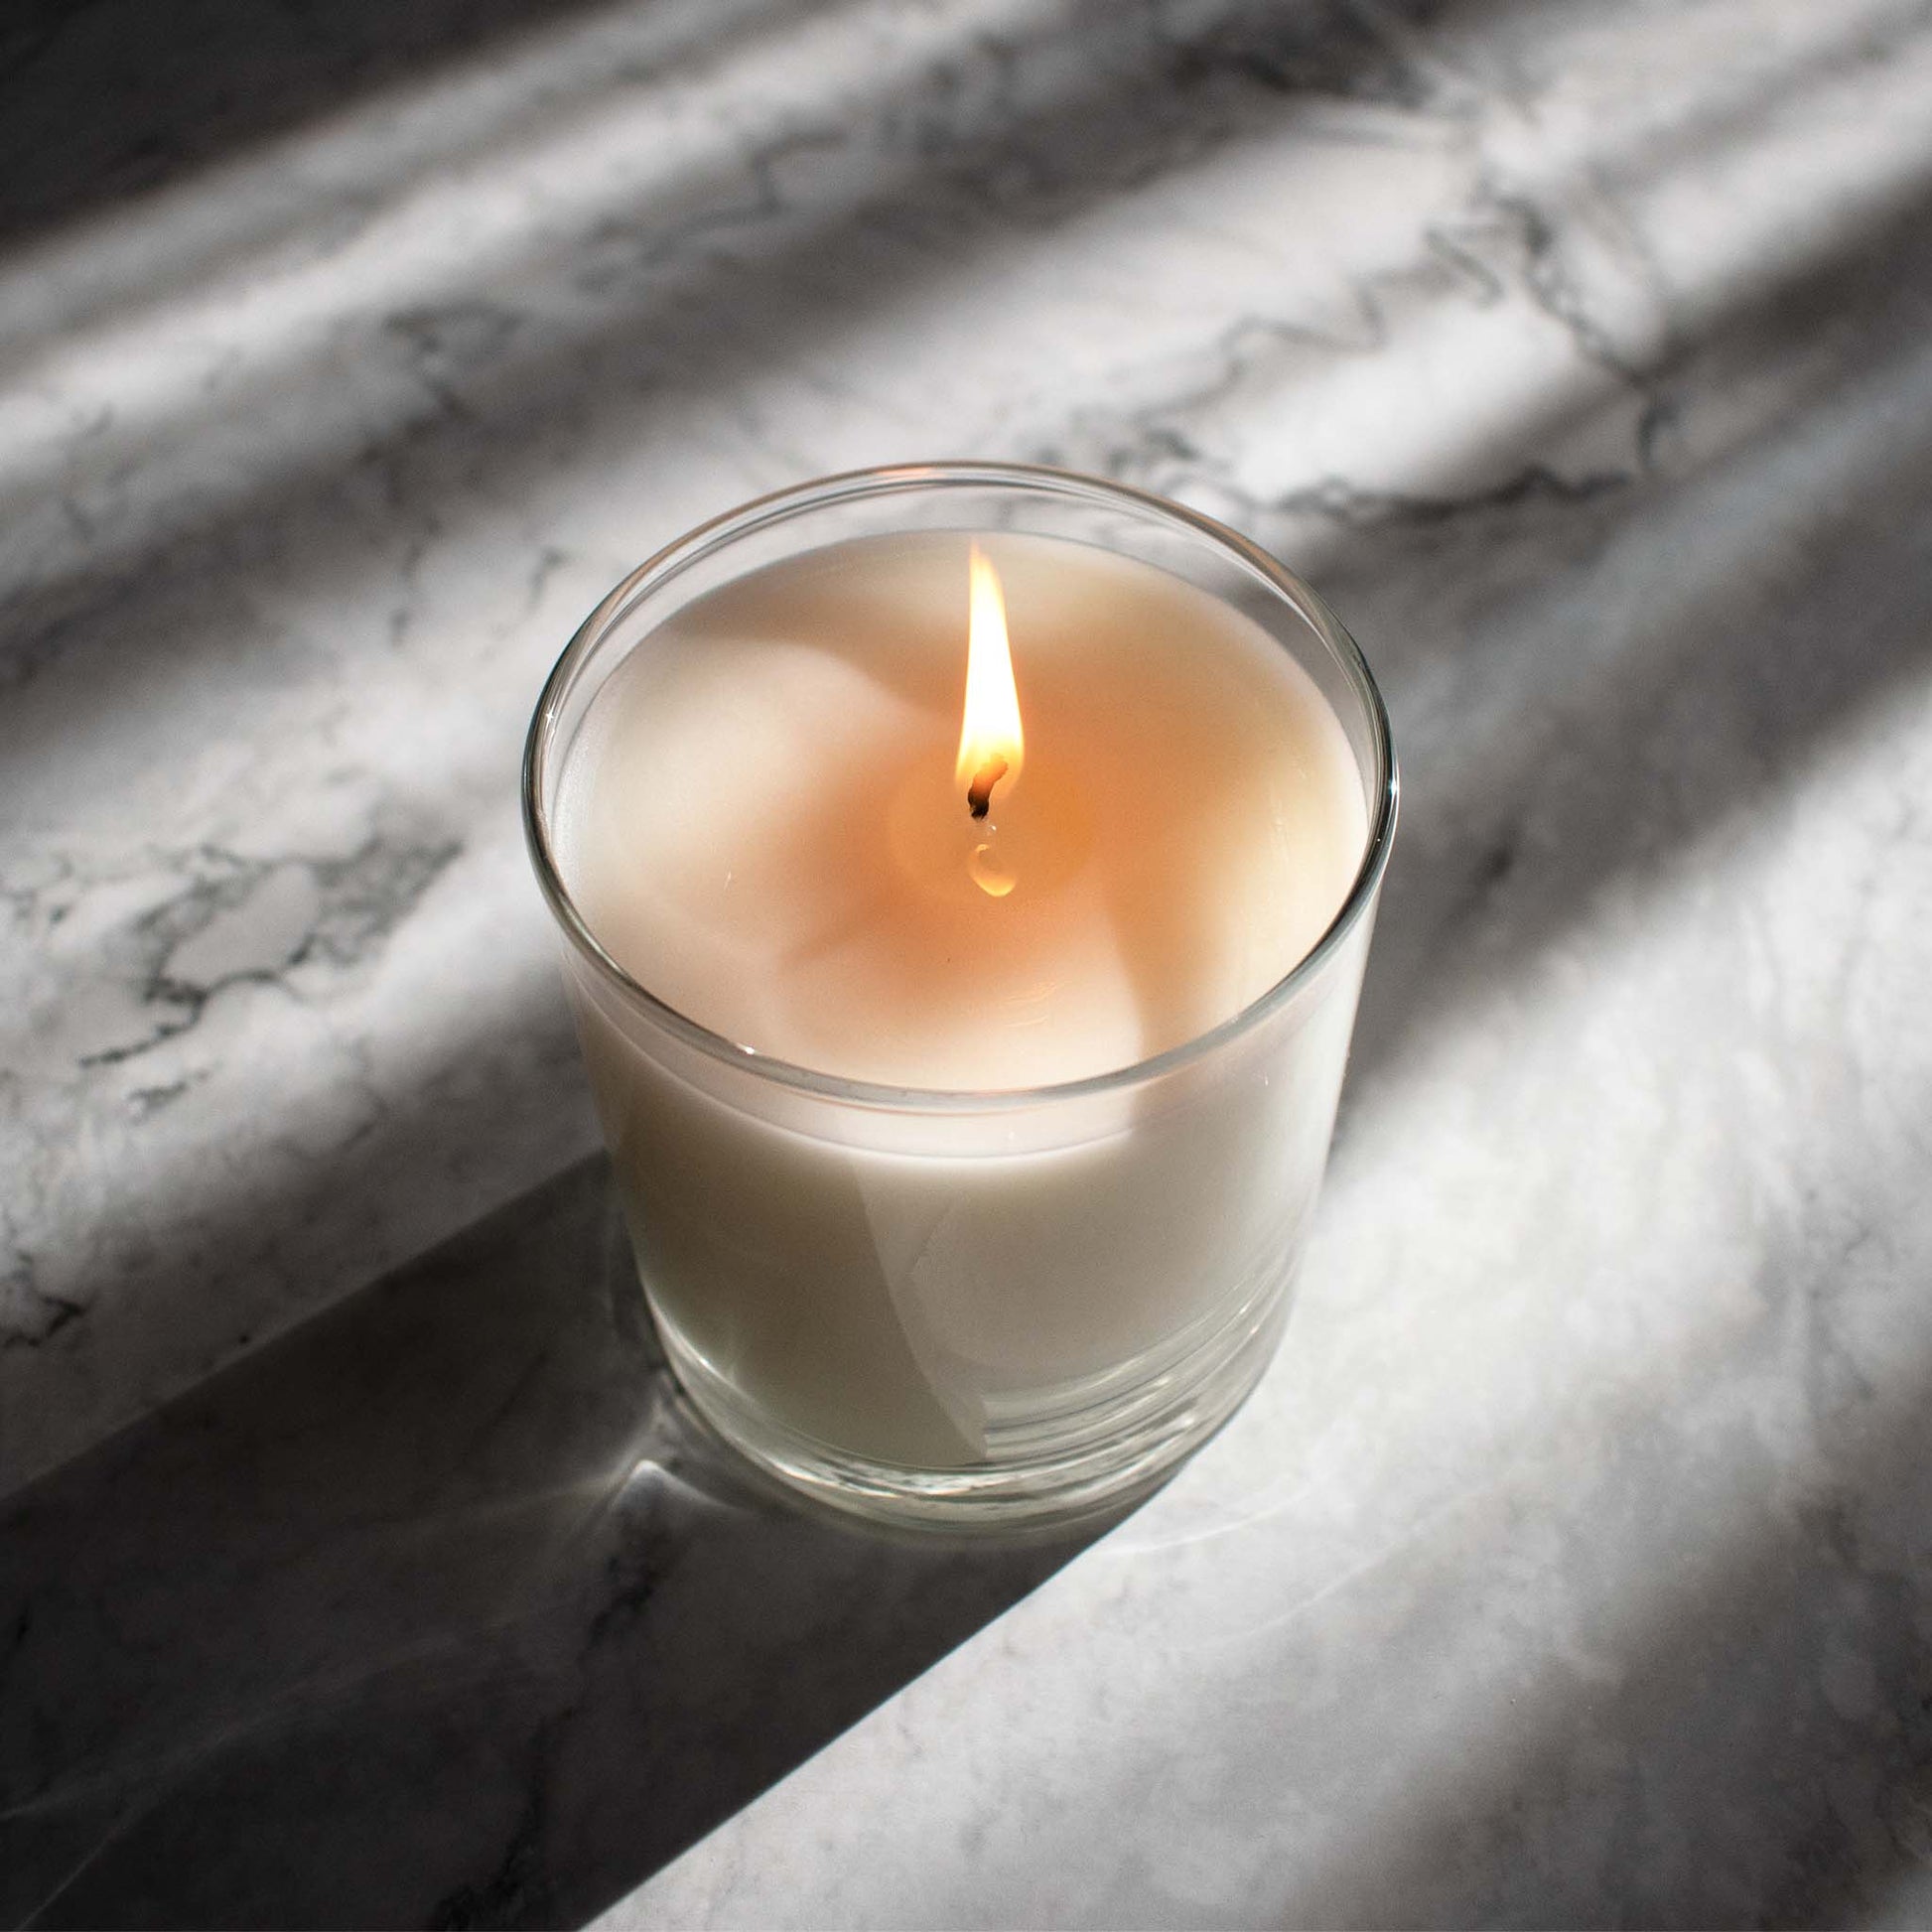 Luxury scented soy wax blend burning candle on marble table with sunrays.